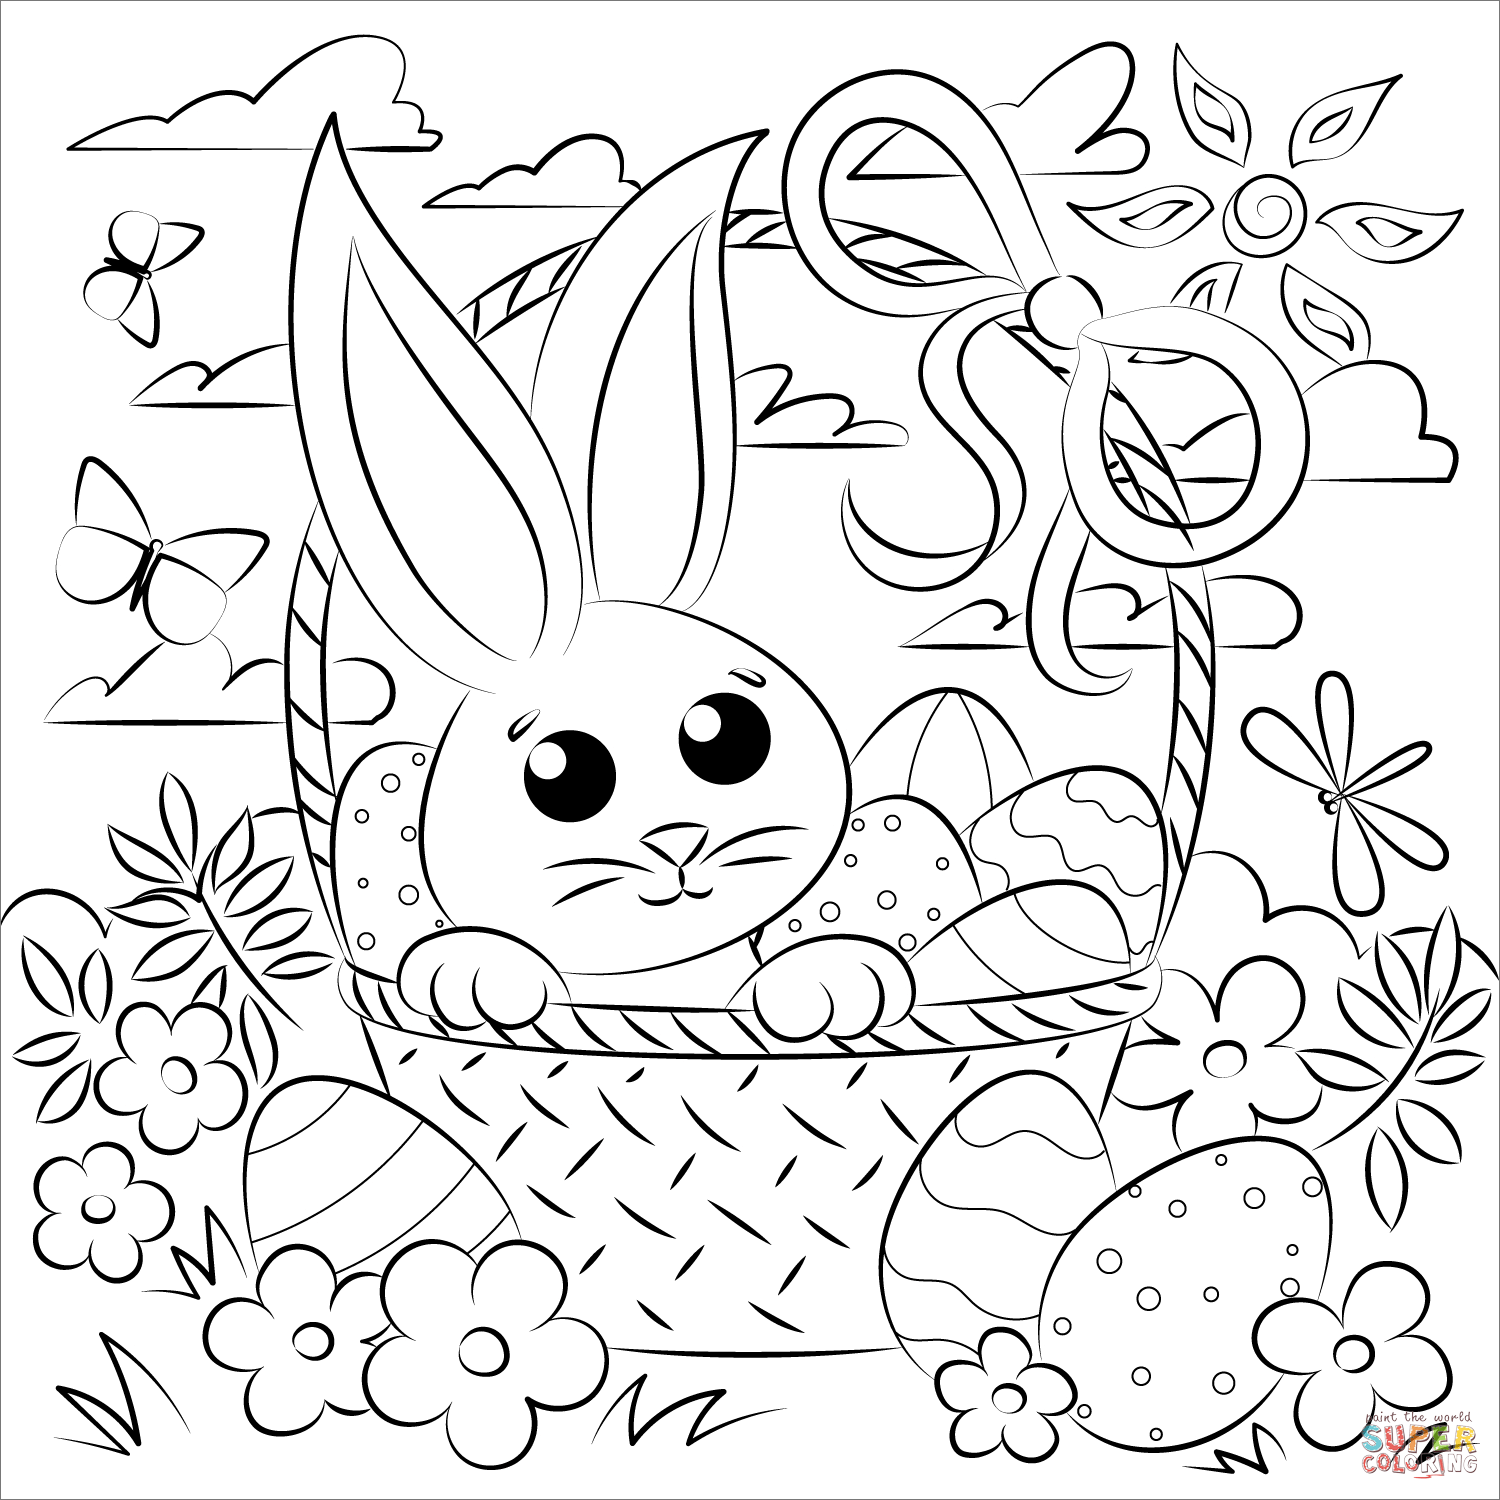 Easter basket and bunny coloring page free printable coloring pages